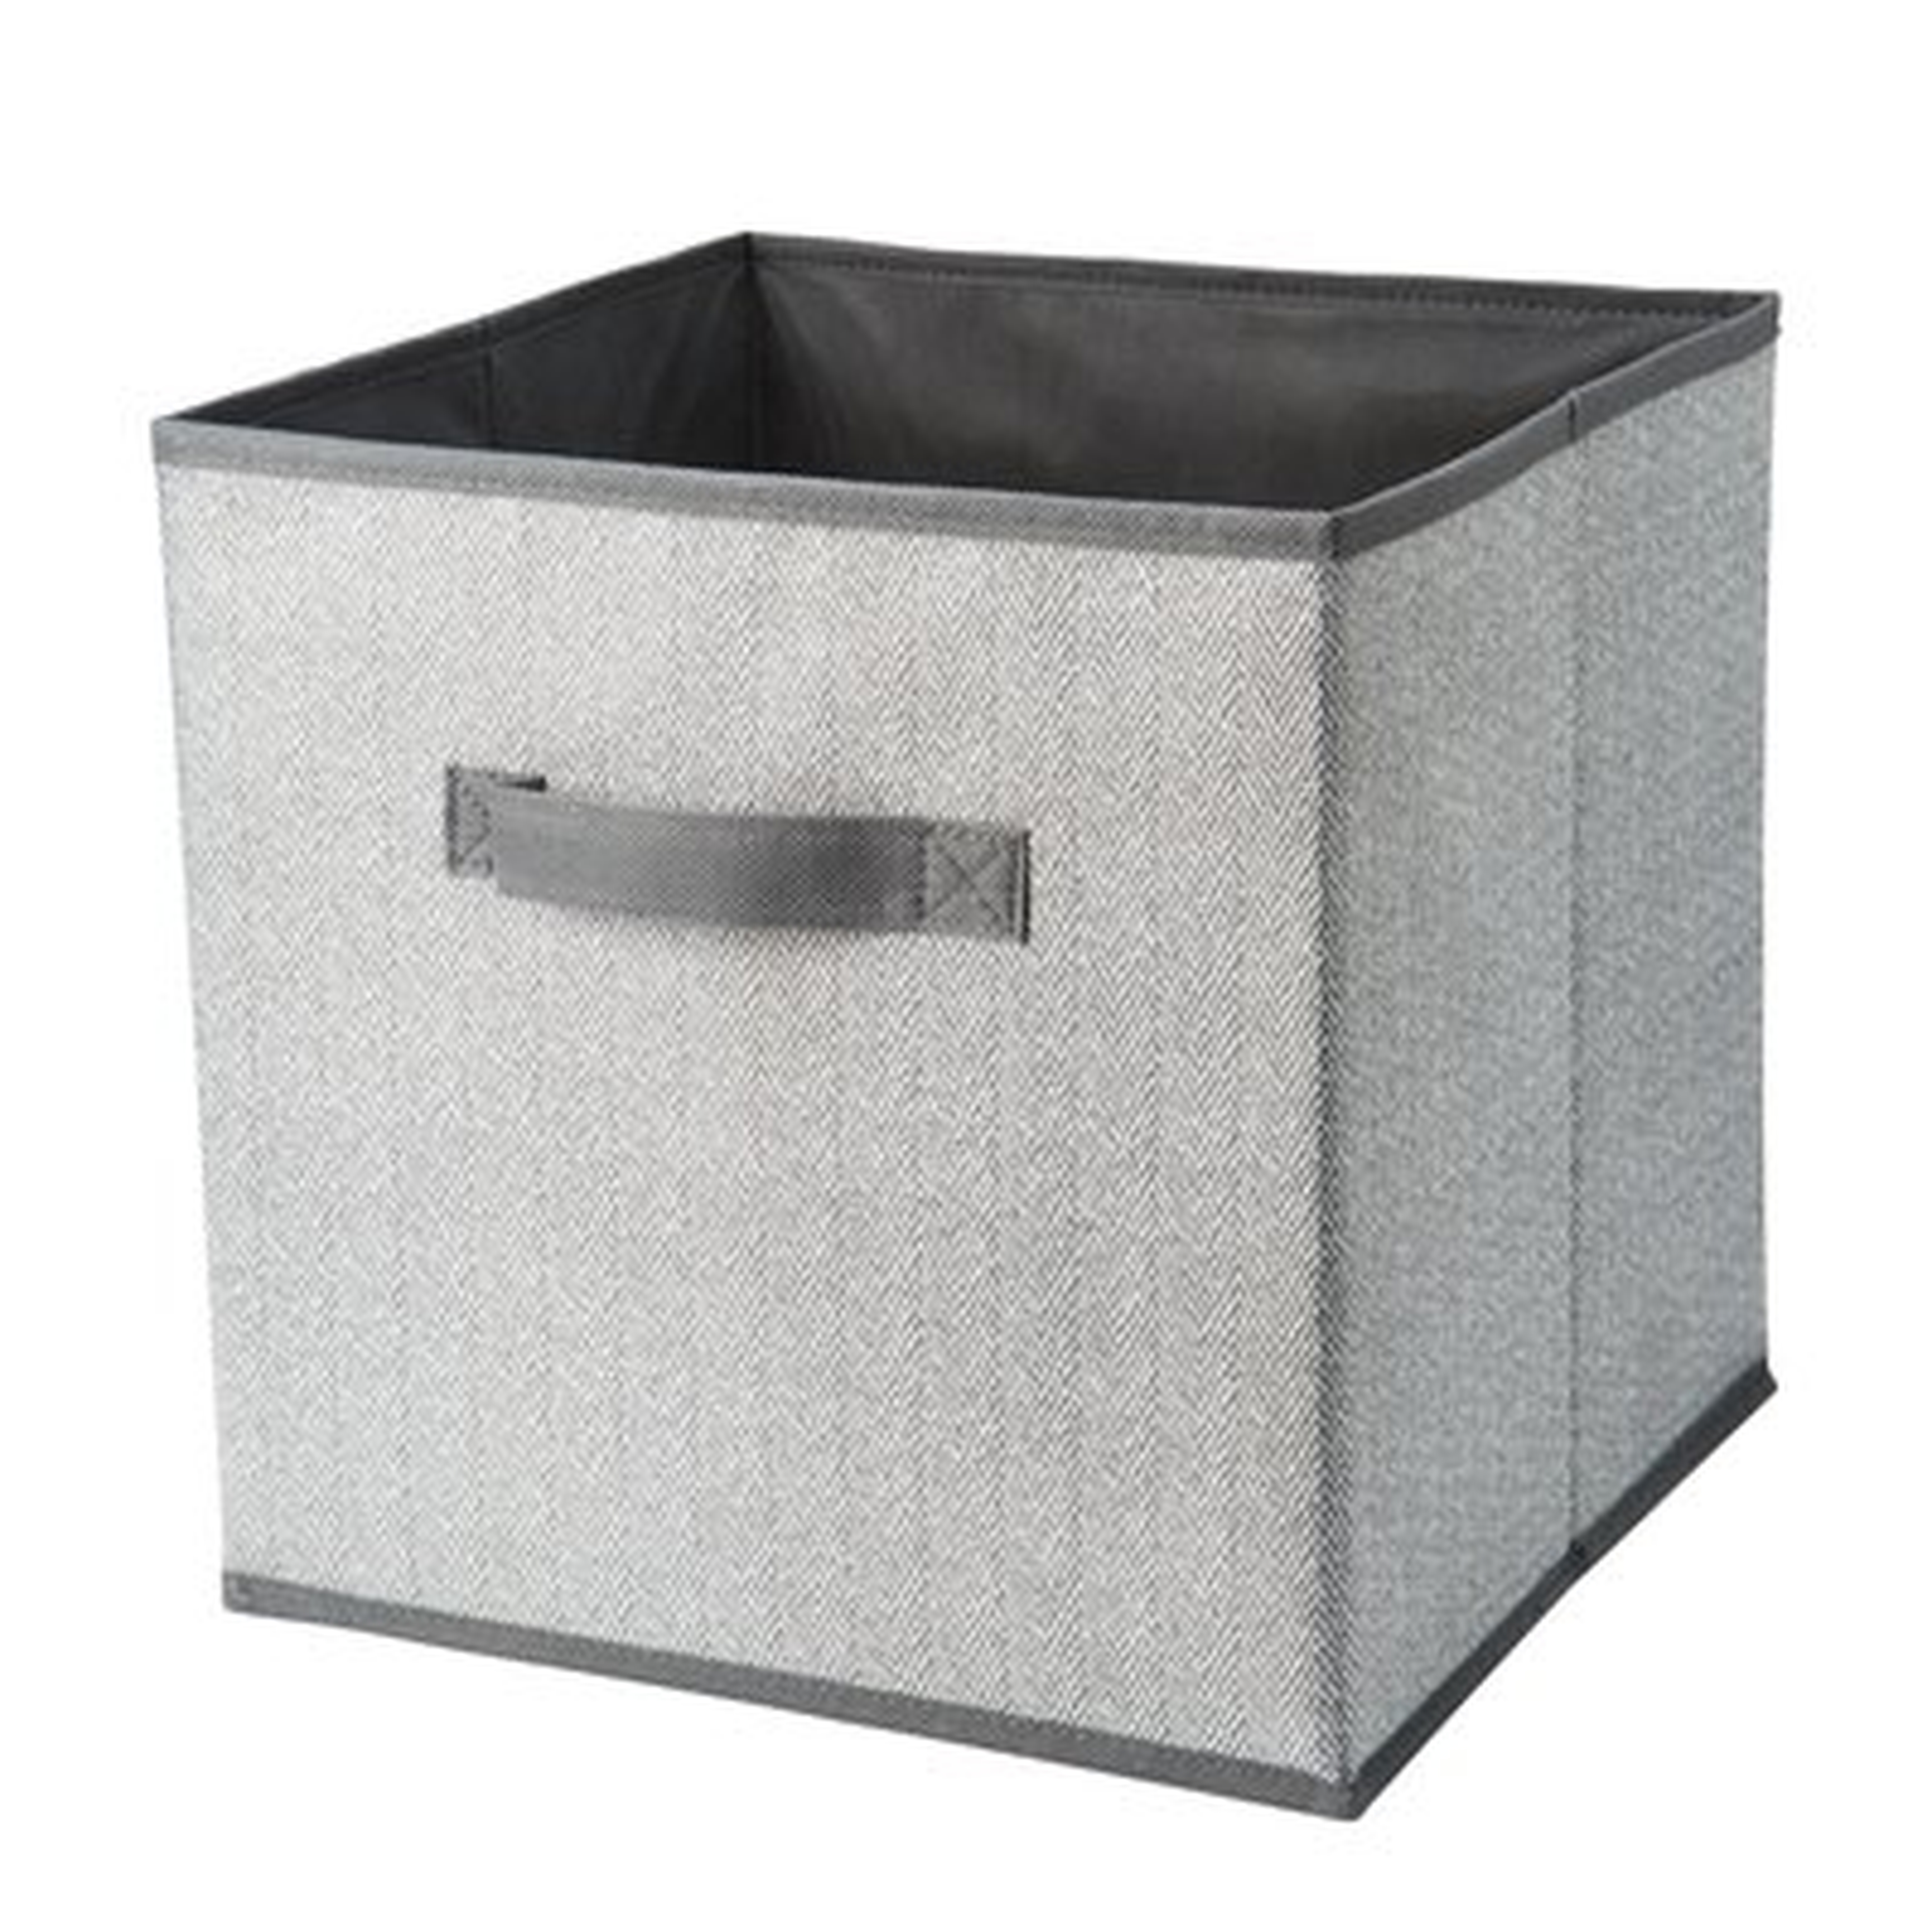 Collapsible Storage Fabric Cube - Wayfair